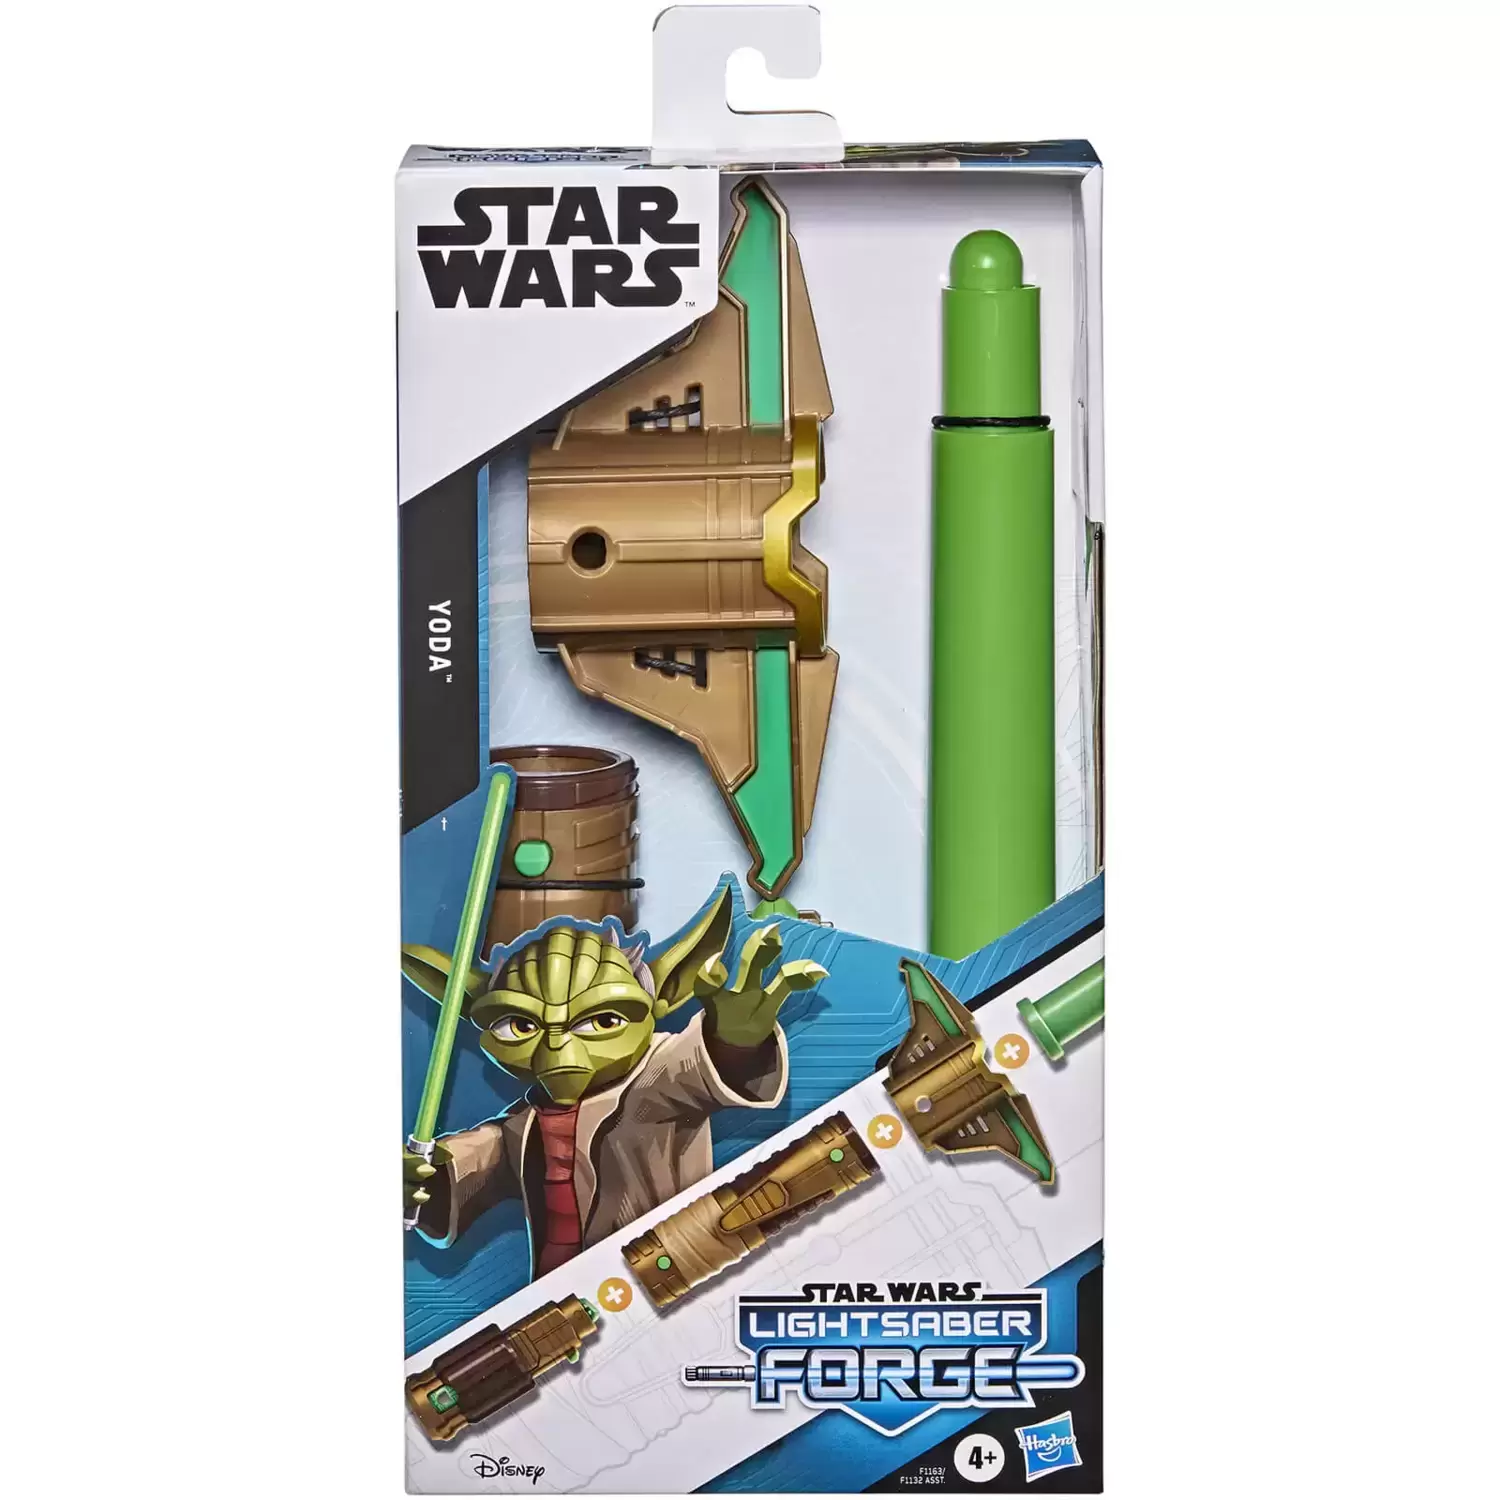 Lightsabers And Roleplay Items - Lightsaber Forge - Yoda